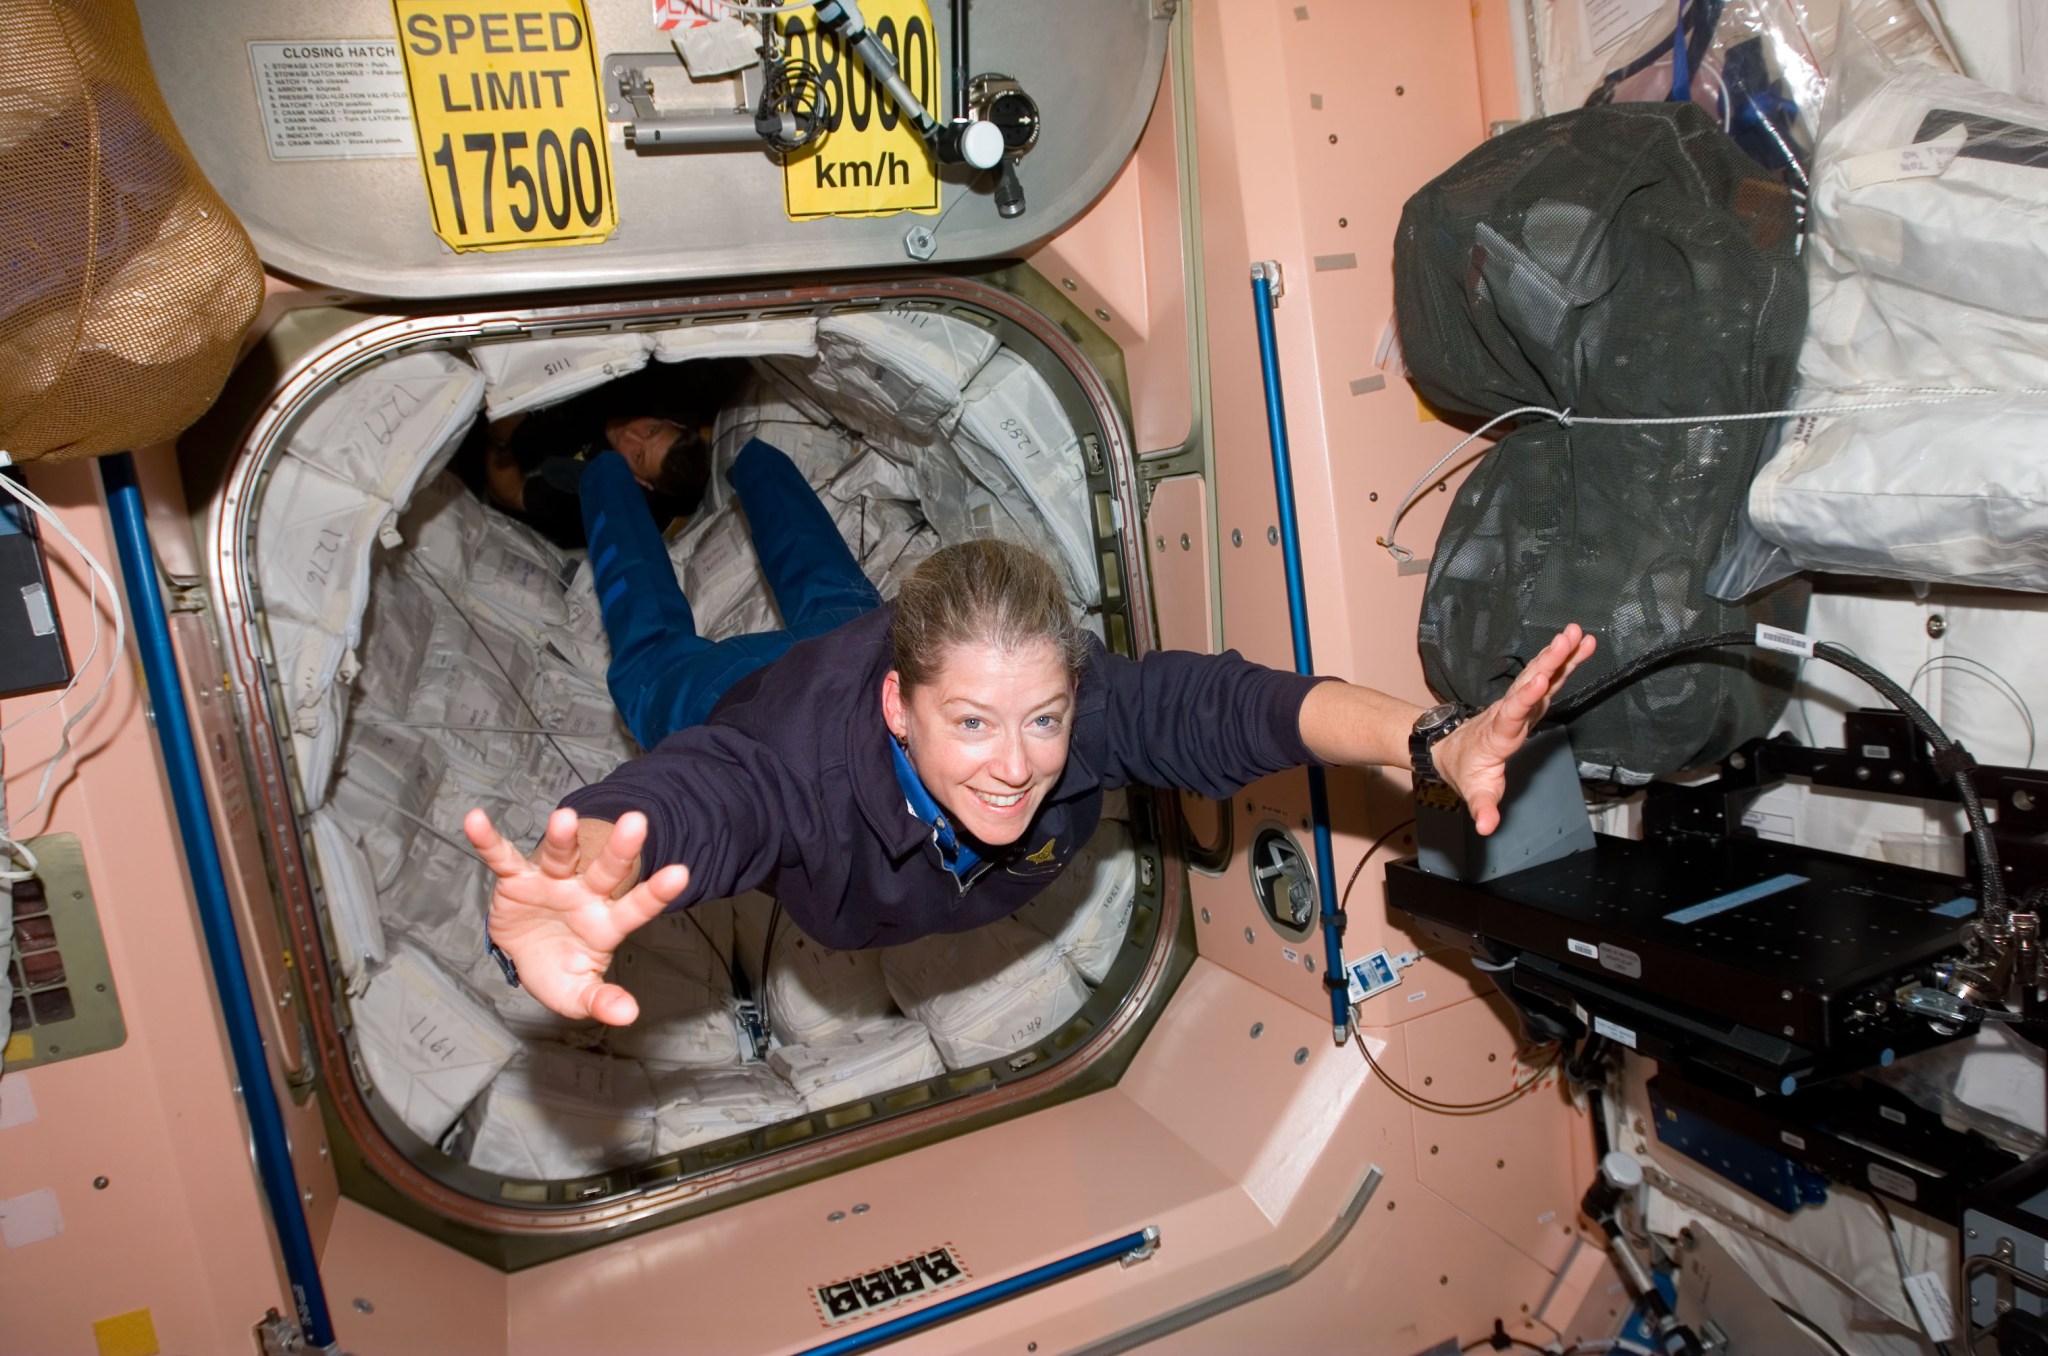 NASA Deputy Administrator Pam Melroy in 2007, when she was serving as an astronaut and mission commander, floating into the Unity node of the International Space Station.